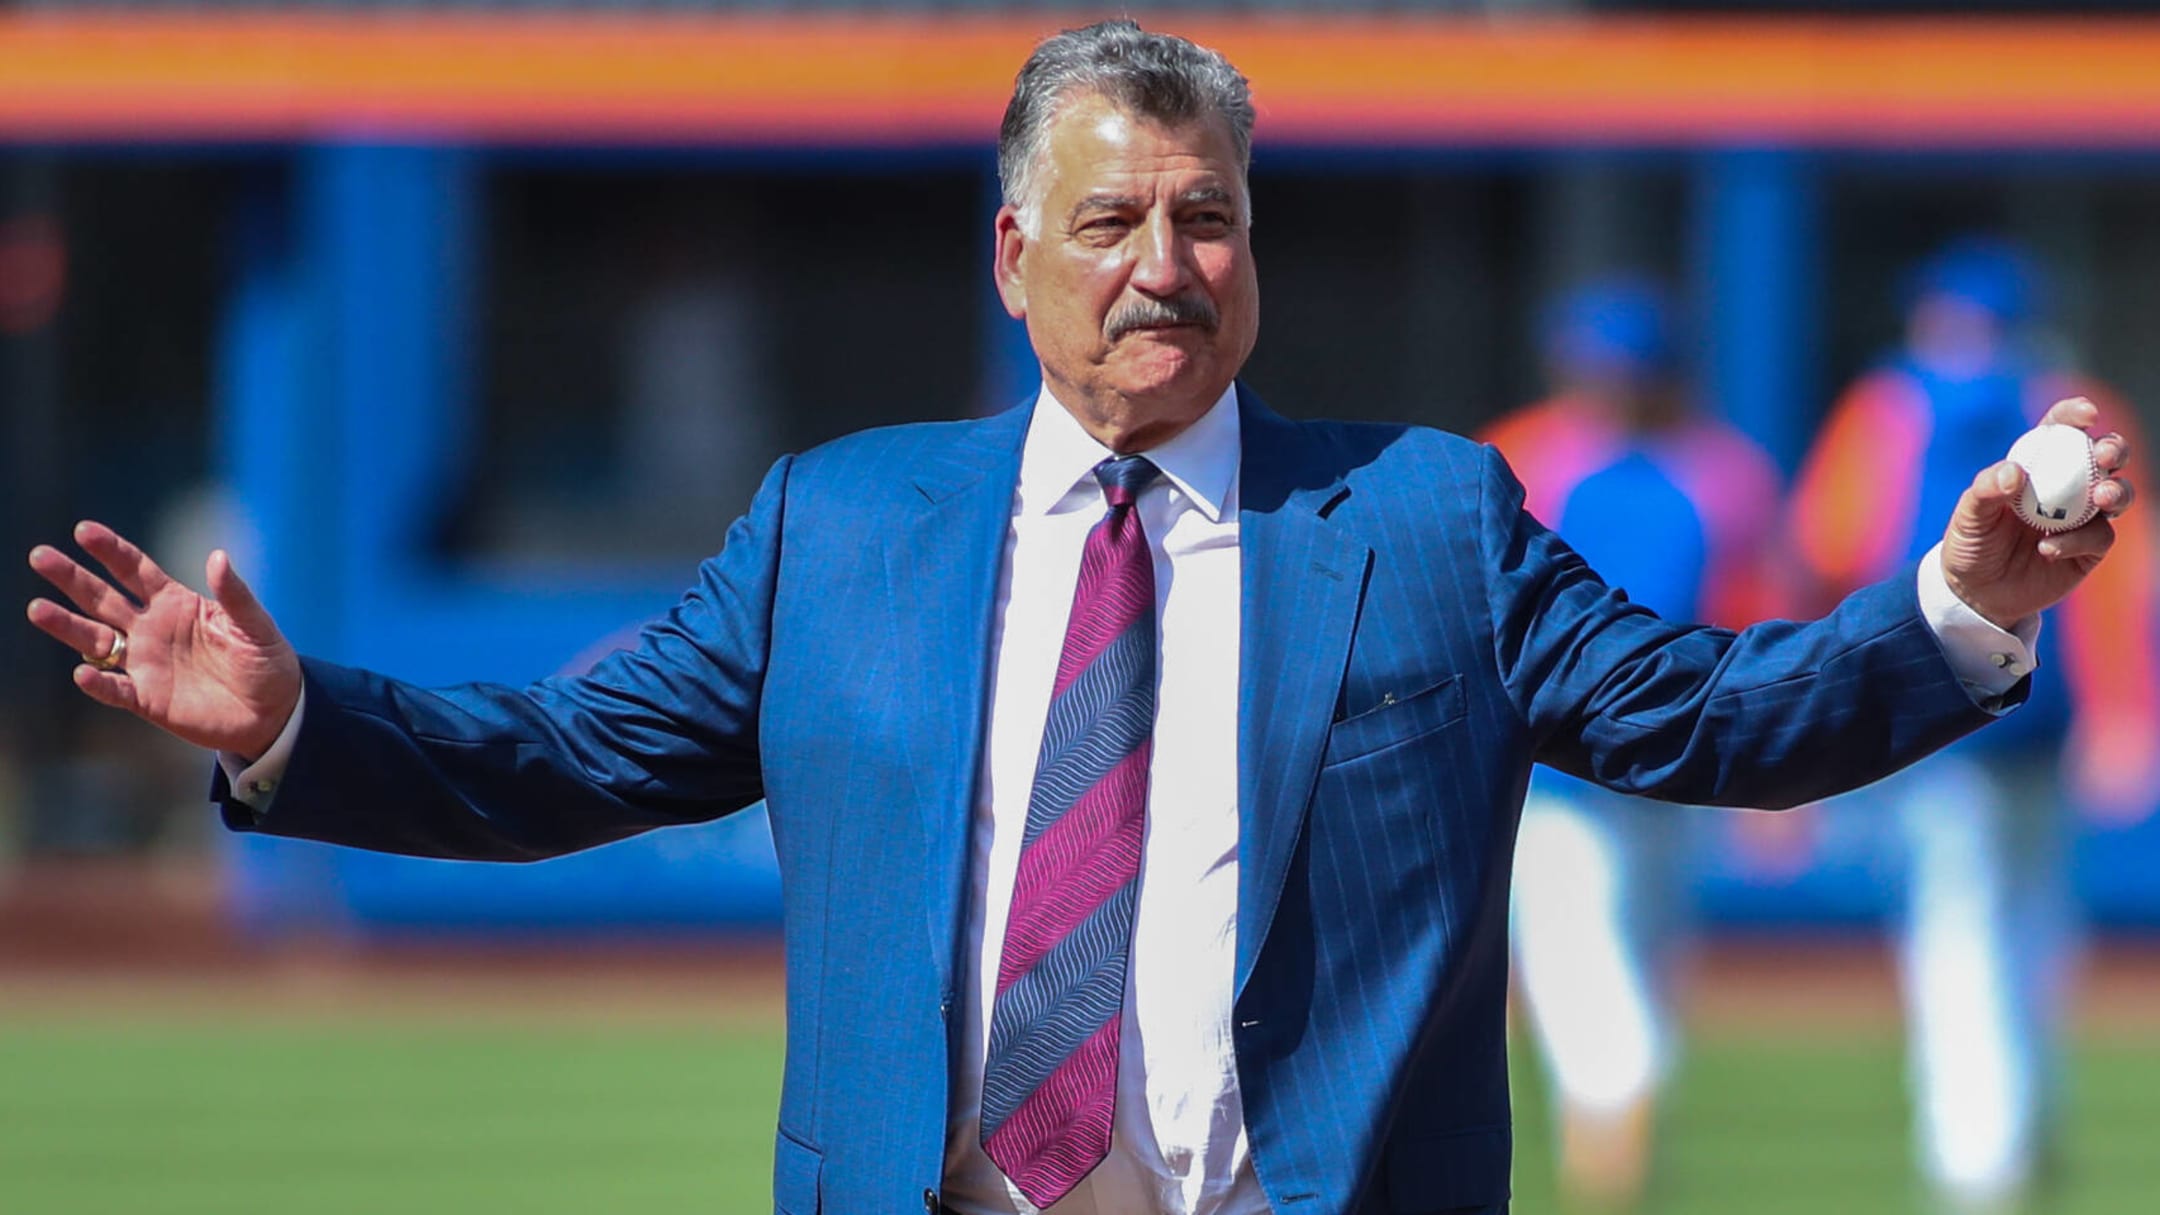 SNY's Keith Hernandez out with shoulder injury